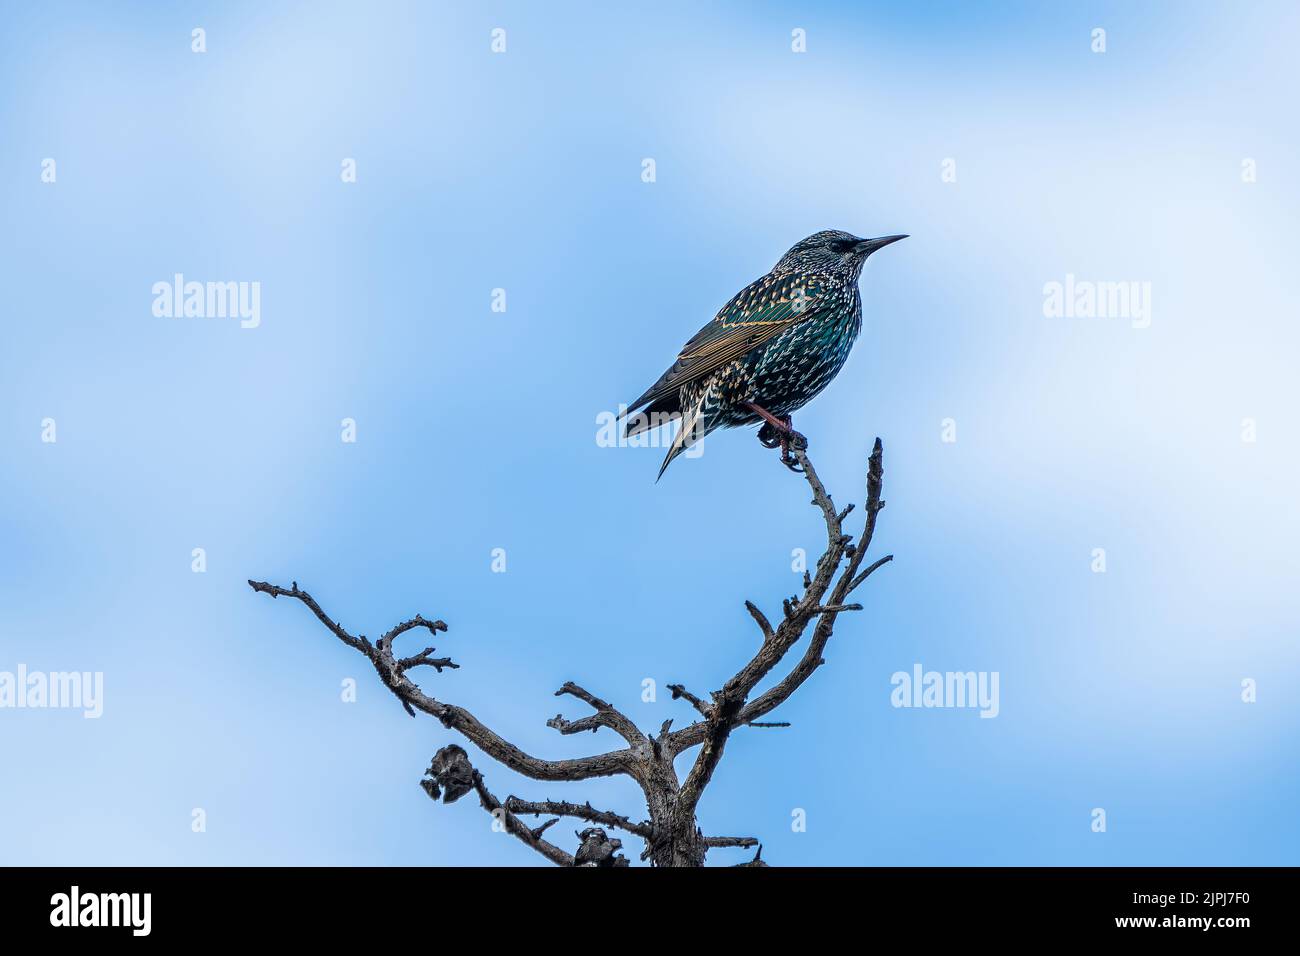 STARLING PERCHED ON A TREE BRANCH WITH A BLUE SKY Stock Photo